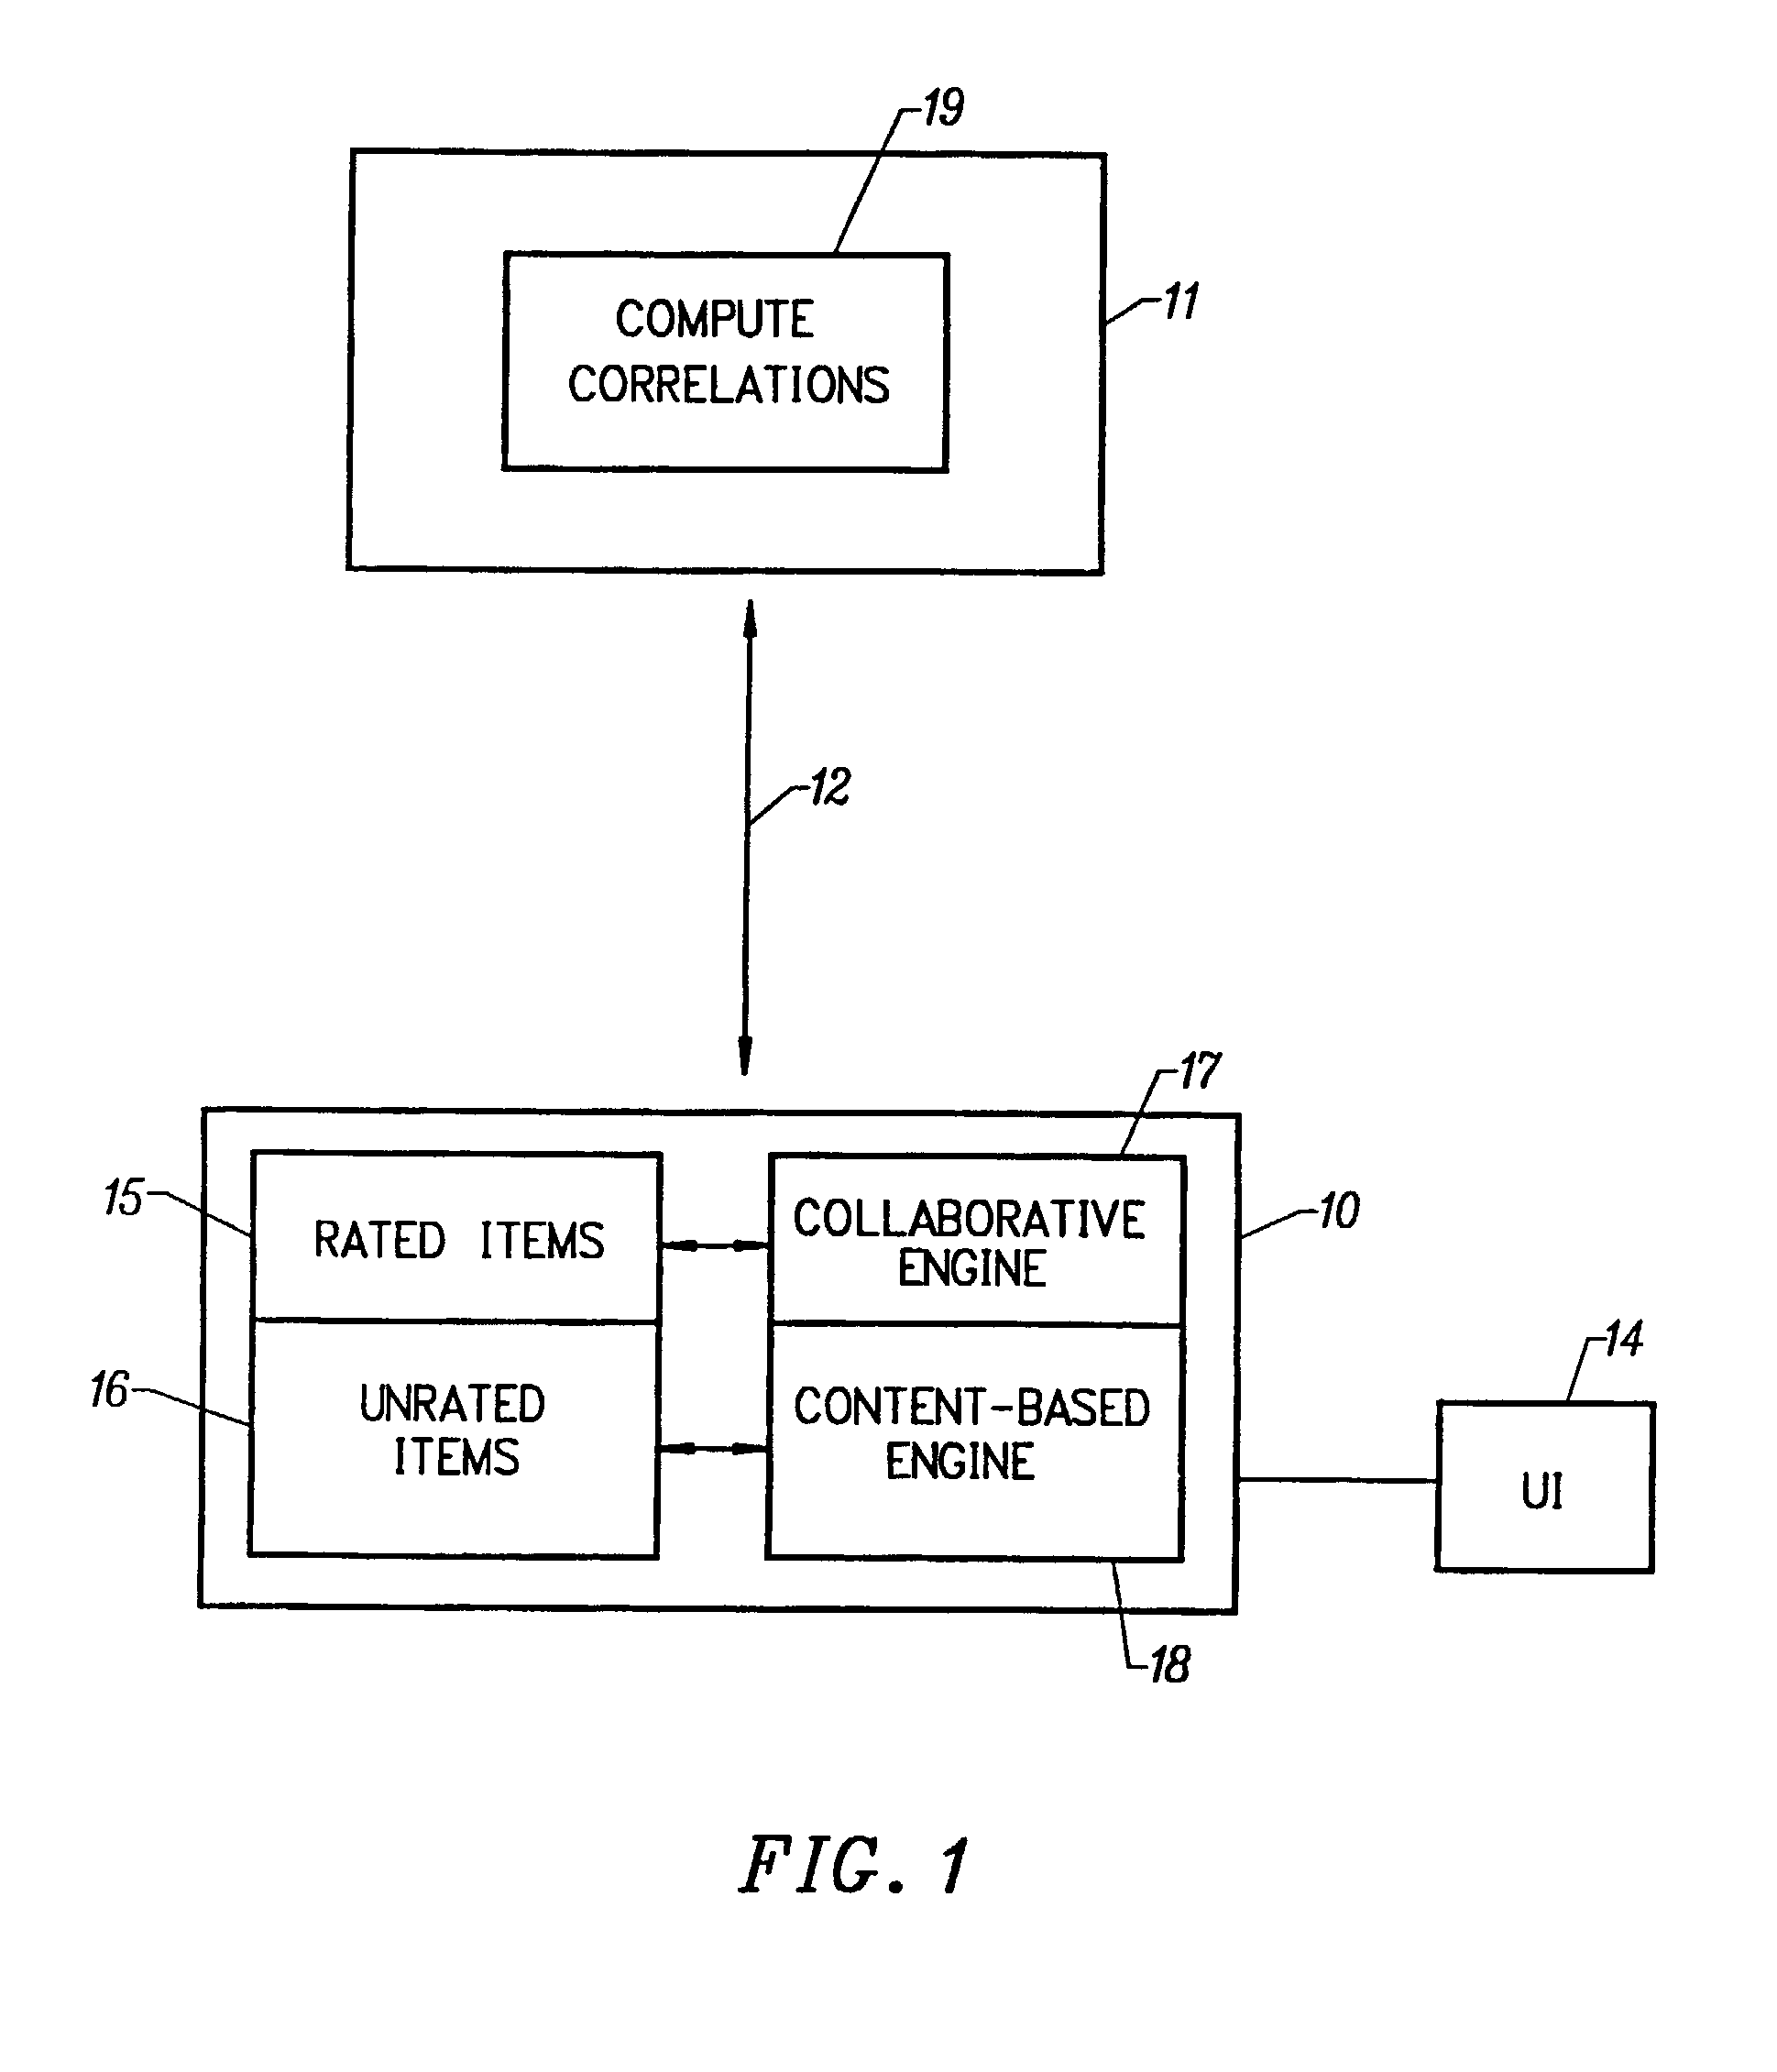 Intelligent system and methods of recommending media content items based on user preferences